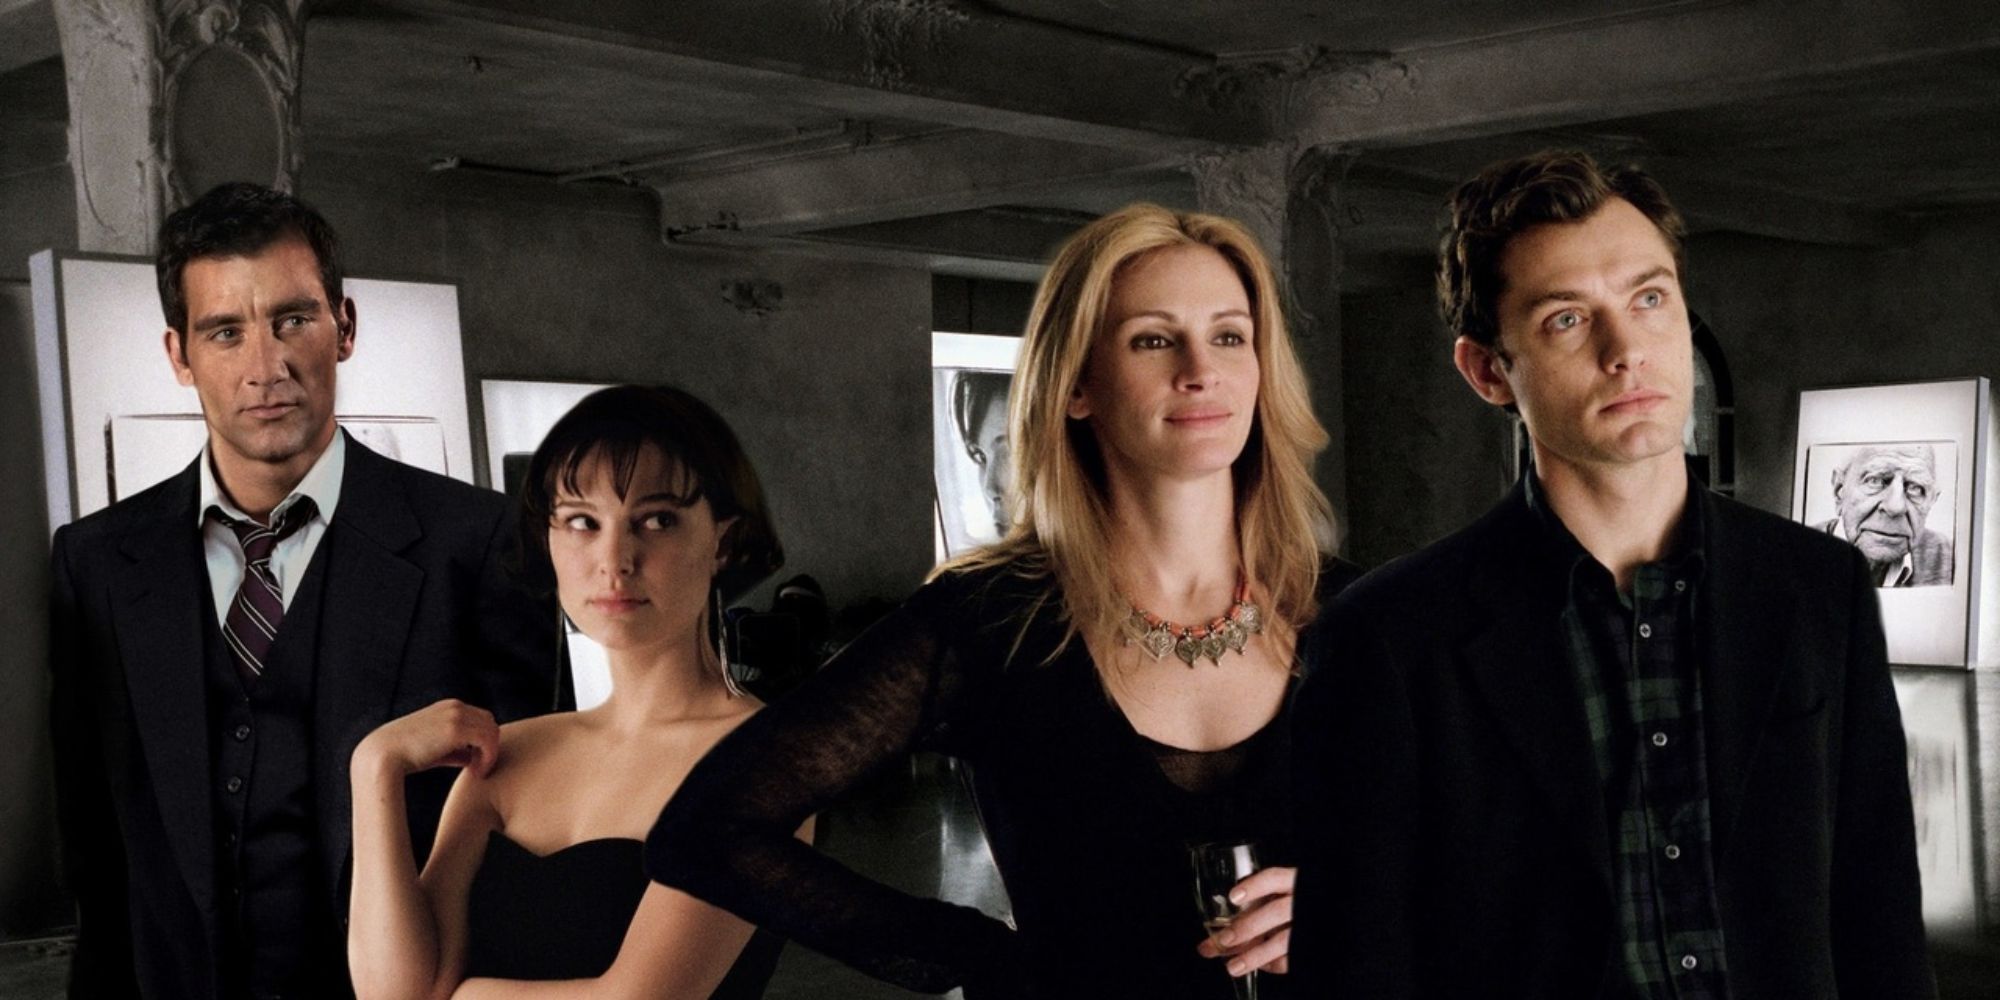 Clive Owen, Natalie Portman, Julia Roberts, and Jude law standing together in Closer